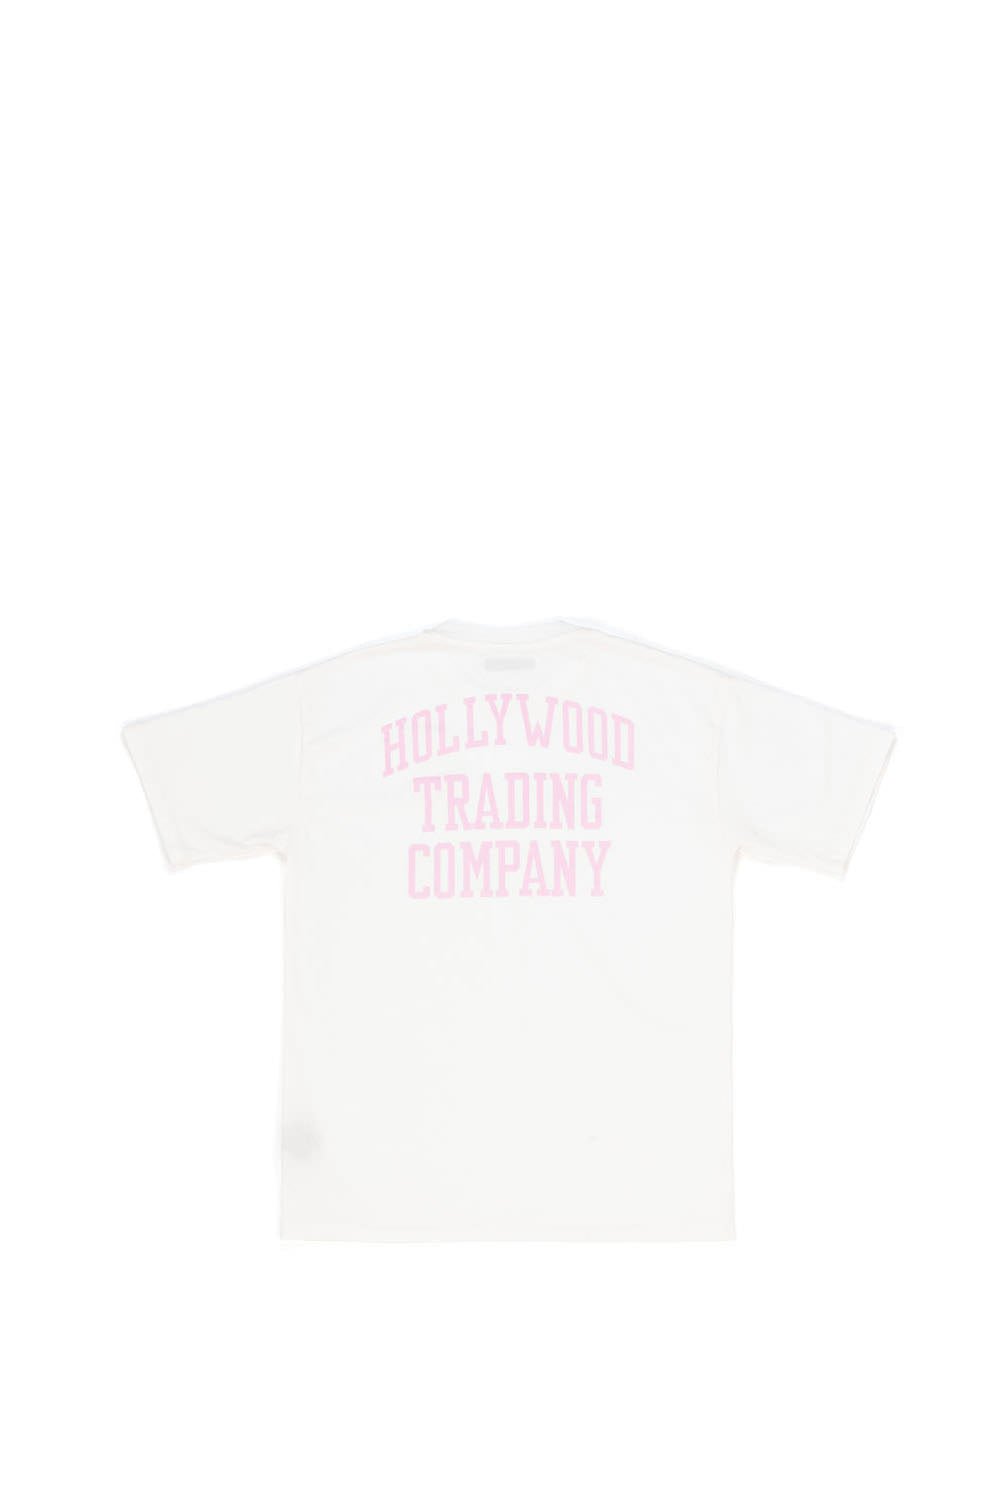 LIL HOLLYWOOD T.C. T-SHIRT Regular fit t-shirt with printed htc logo on the front and back. Composition: 100% Cotton HTC LOS ANGELES